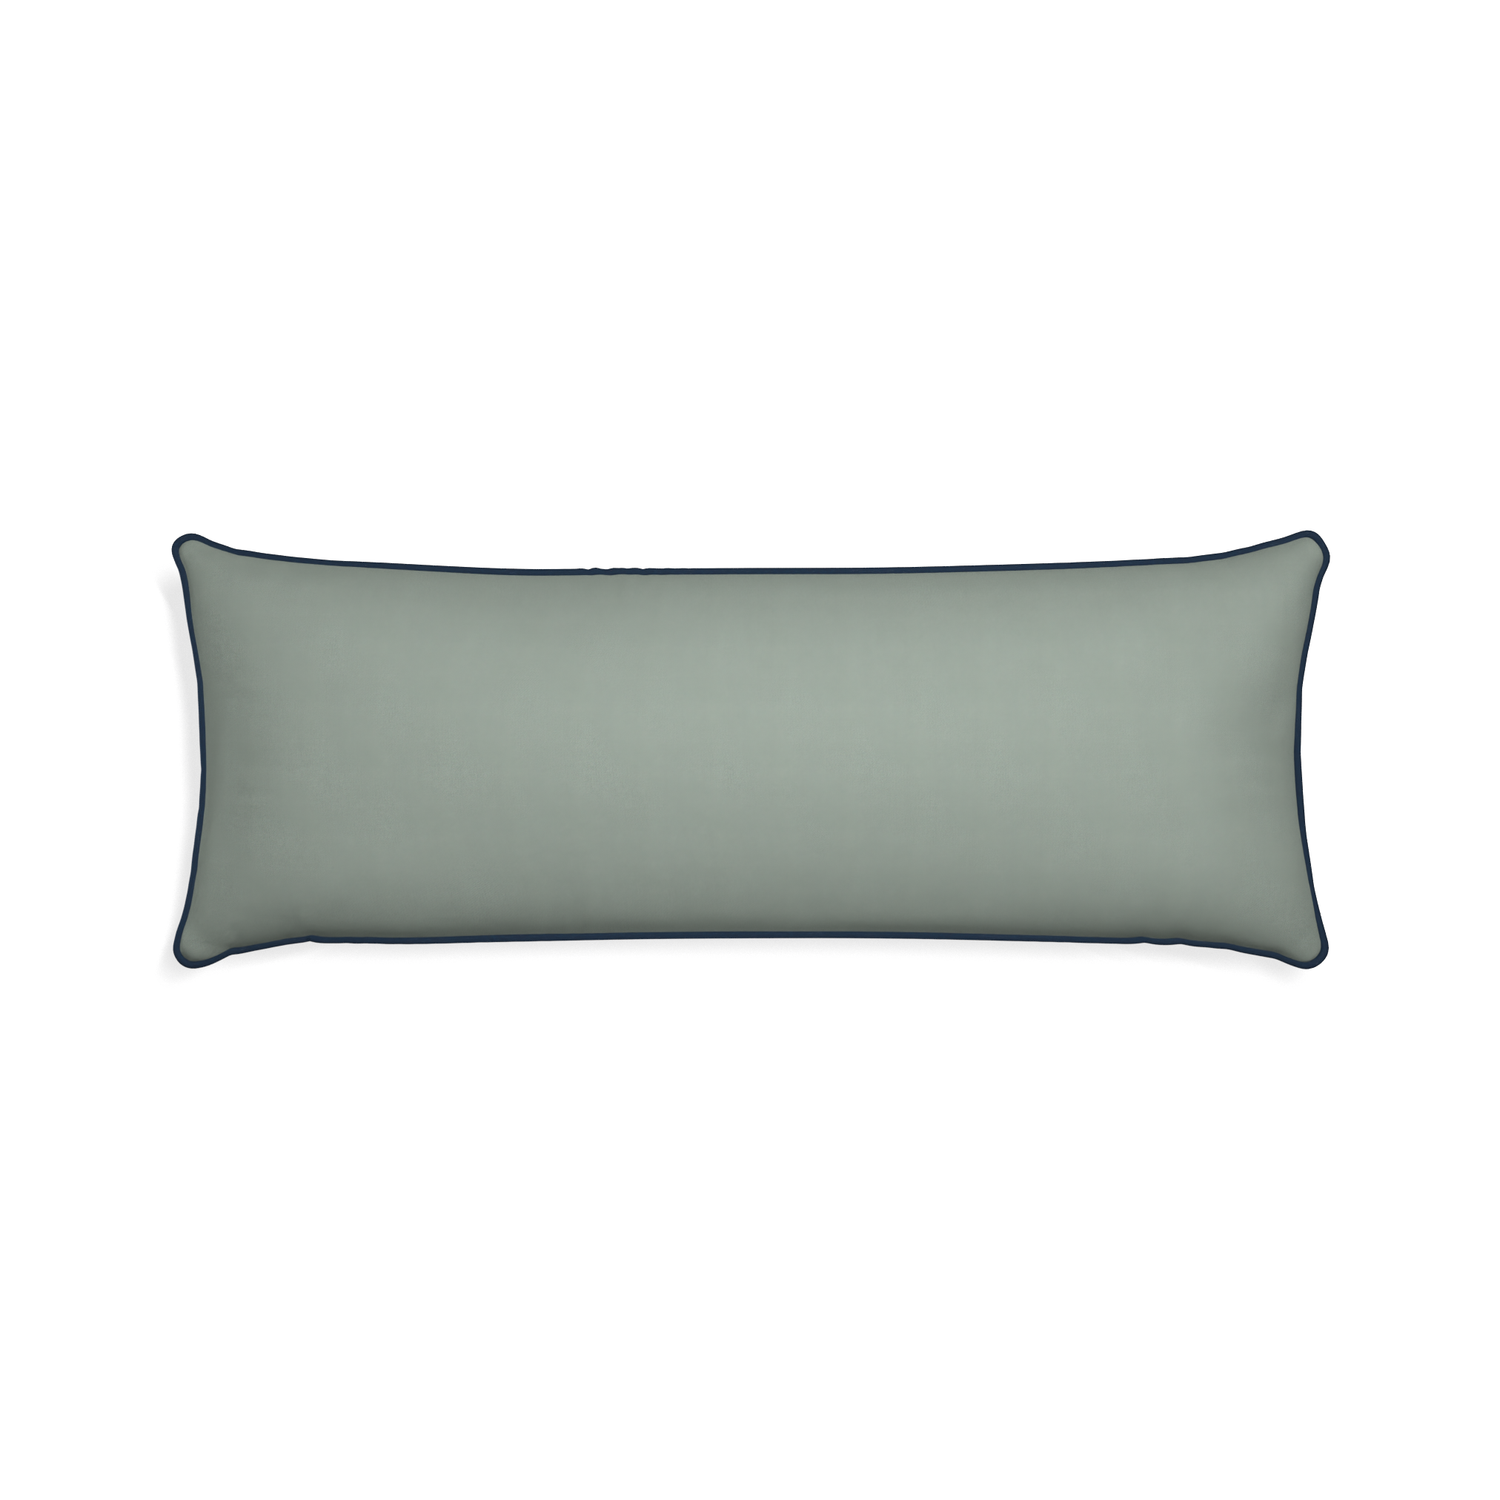 Xl-lumbar sage custom sage green cottonpillow with c piping on white background